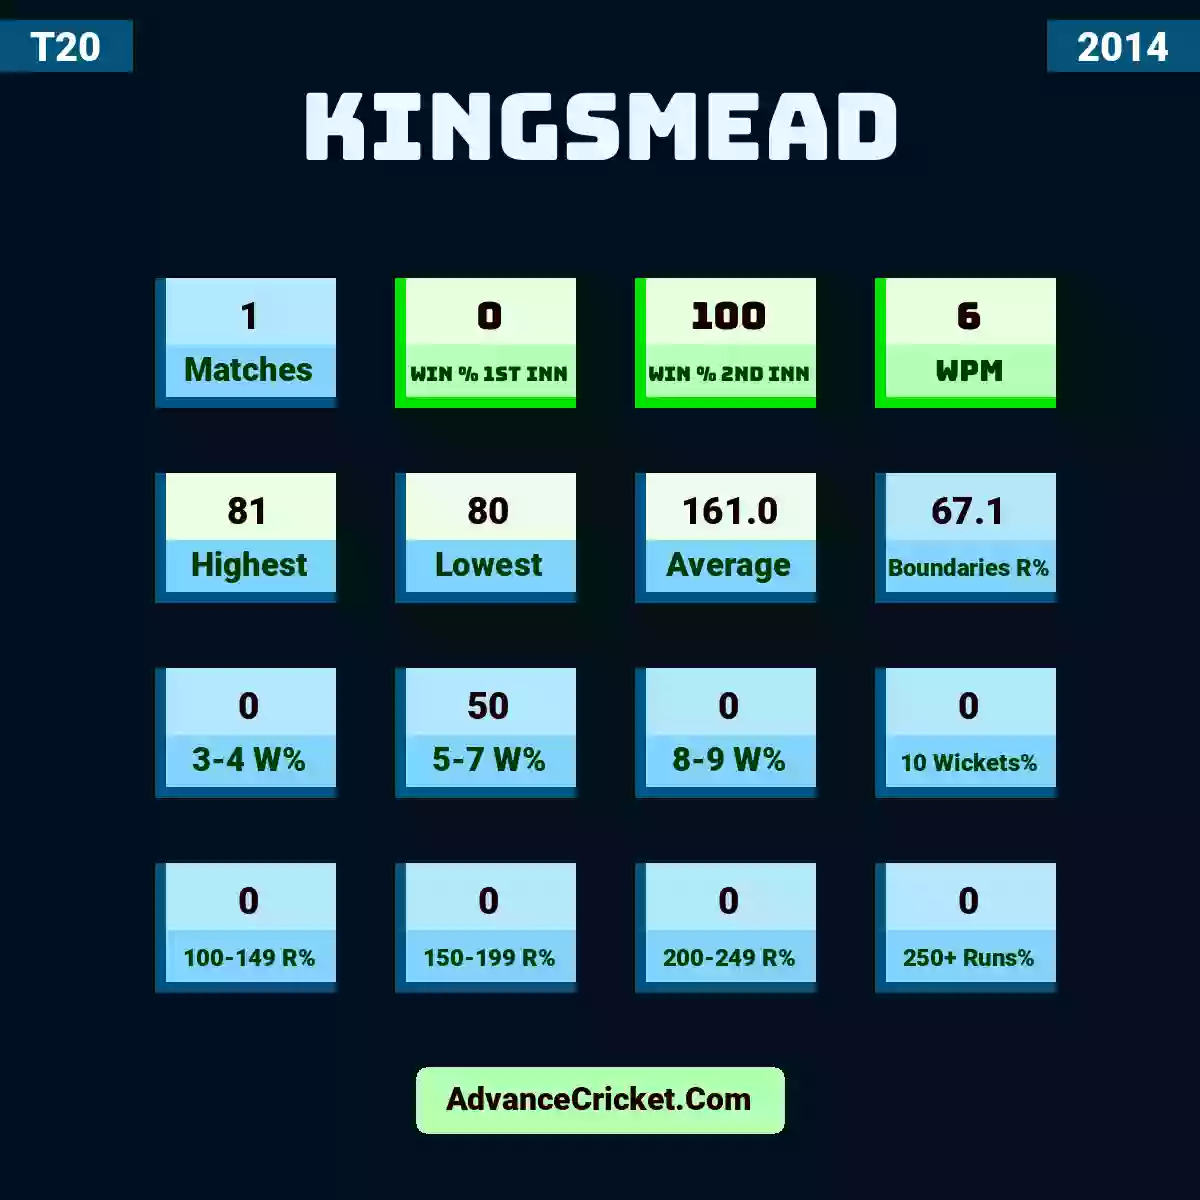 Image showing Kingsmead with Matches: 1, Win % 1st Inn: 0, Win % 2nd Inn: 100, WPM: 6, Highest: 81, Lowest: 80, Average: 161.0, Boundaries R%: 67.1, 3-4 W%: 0, 5-7 W%: 50, 8-9 W%: 0, 10 Wickets%: 0, 100-149 R%: 0, 150-199 R%: 0, 200-249 R%: 0, 250+ Runs%: 0.